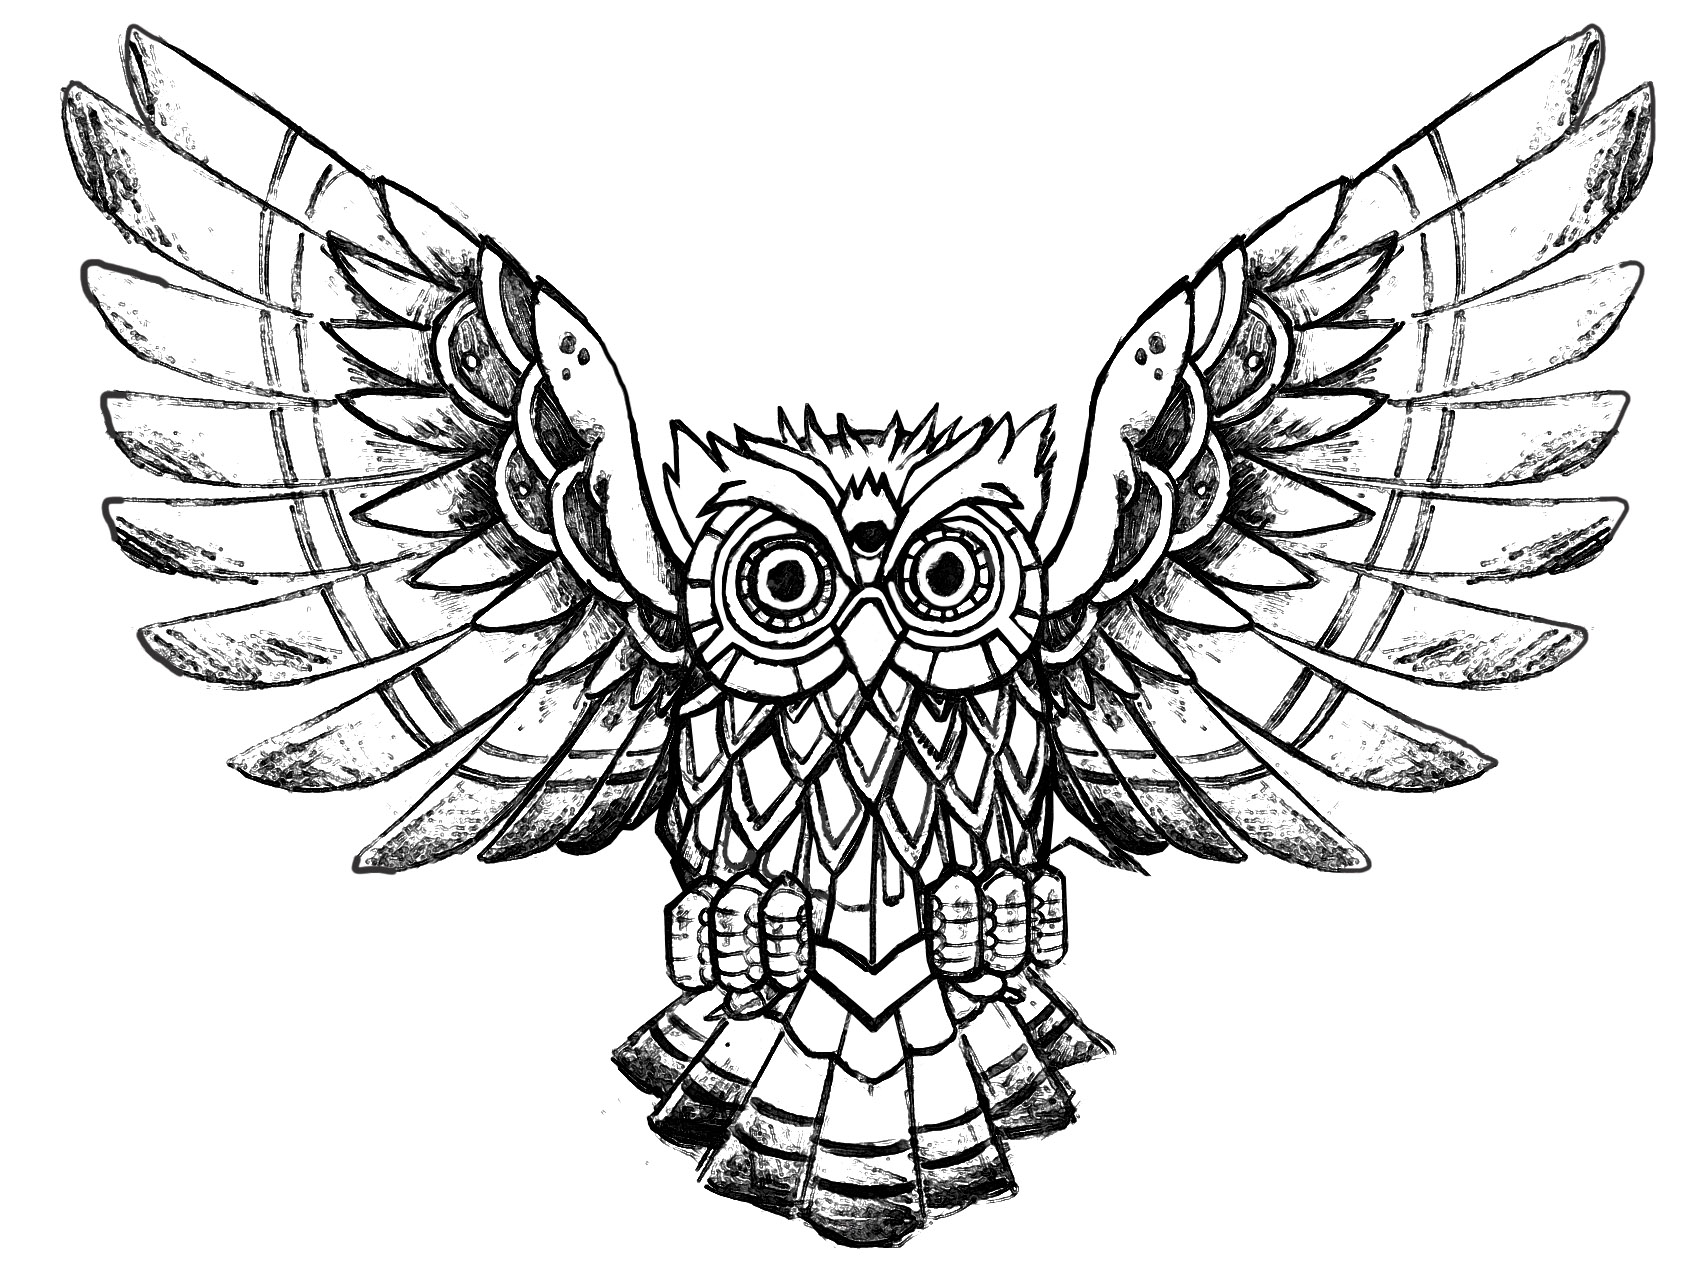 Download Owl raw drawing - Owls Adult Coloring Pages